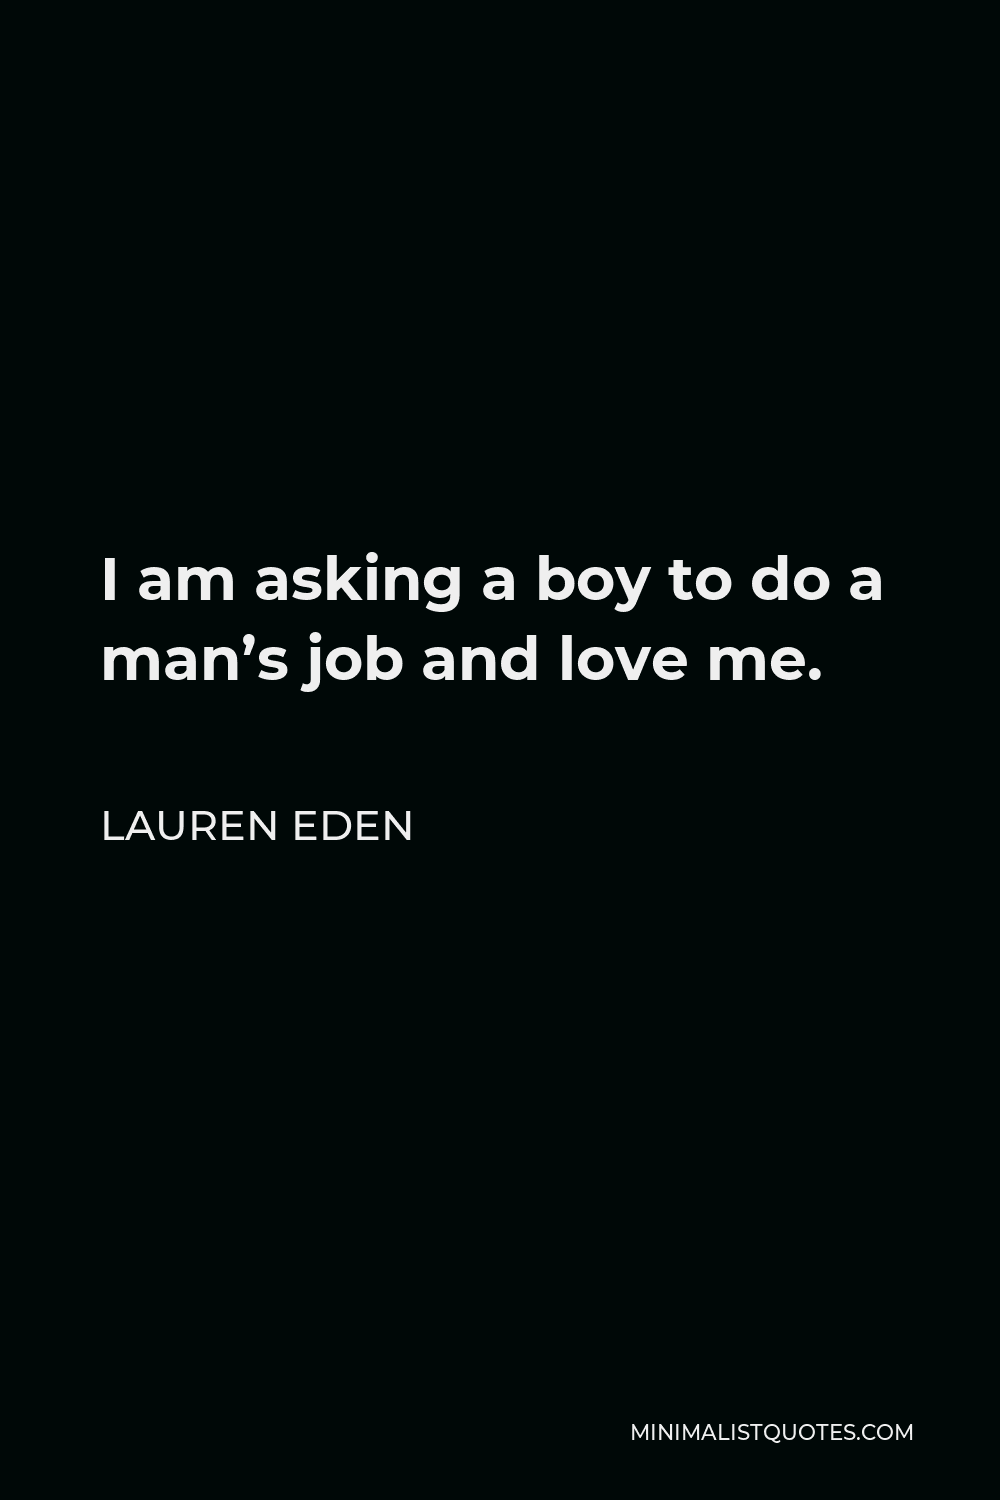 Lauren Eden Quote - I am asking a boy to do a man’s job and love me.